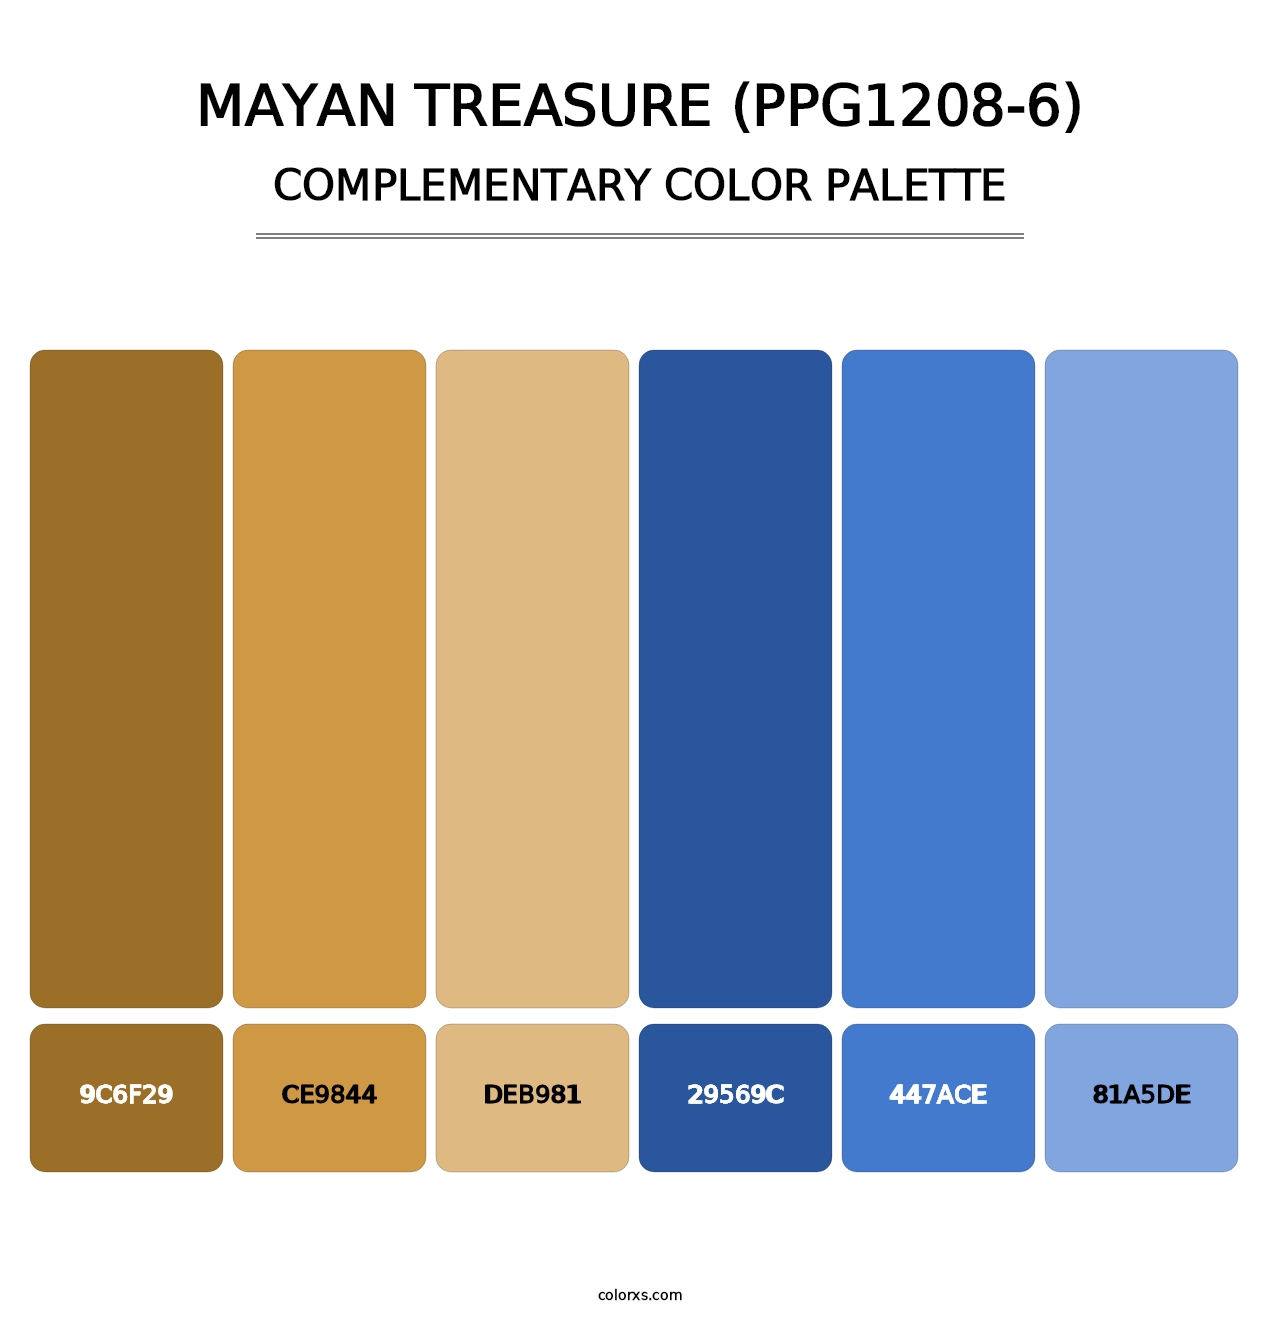 Mayan Treasure (PPG1208-6) - Complementary Color Palette